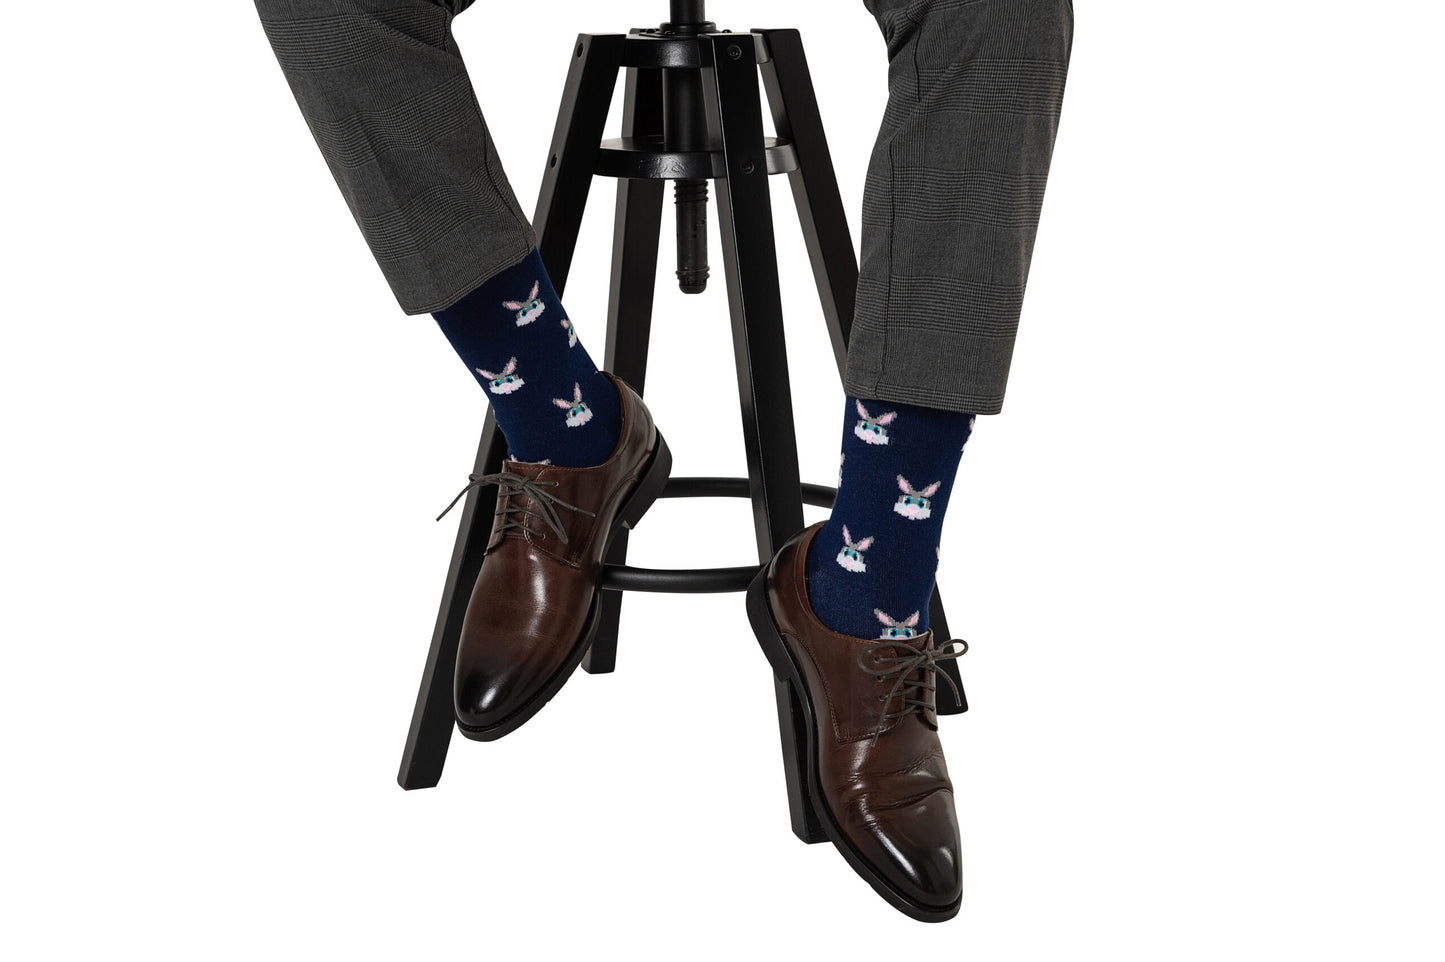 A person wearing brown shoes and blue socks with Bunny Socks on a stool.